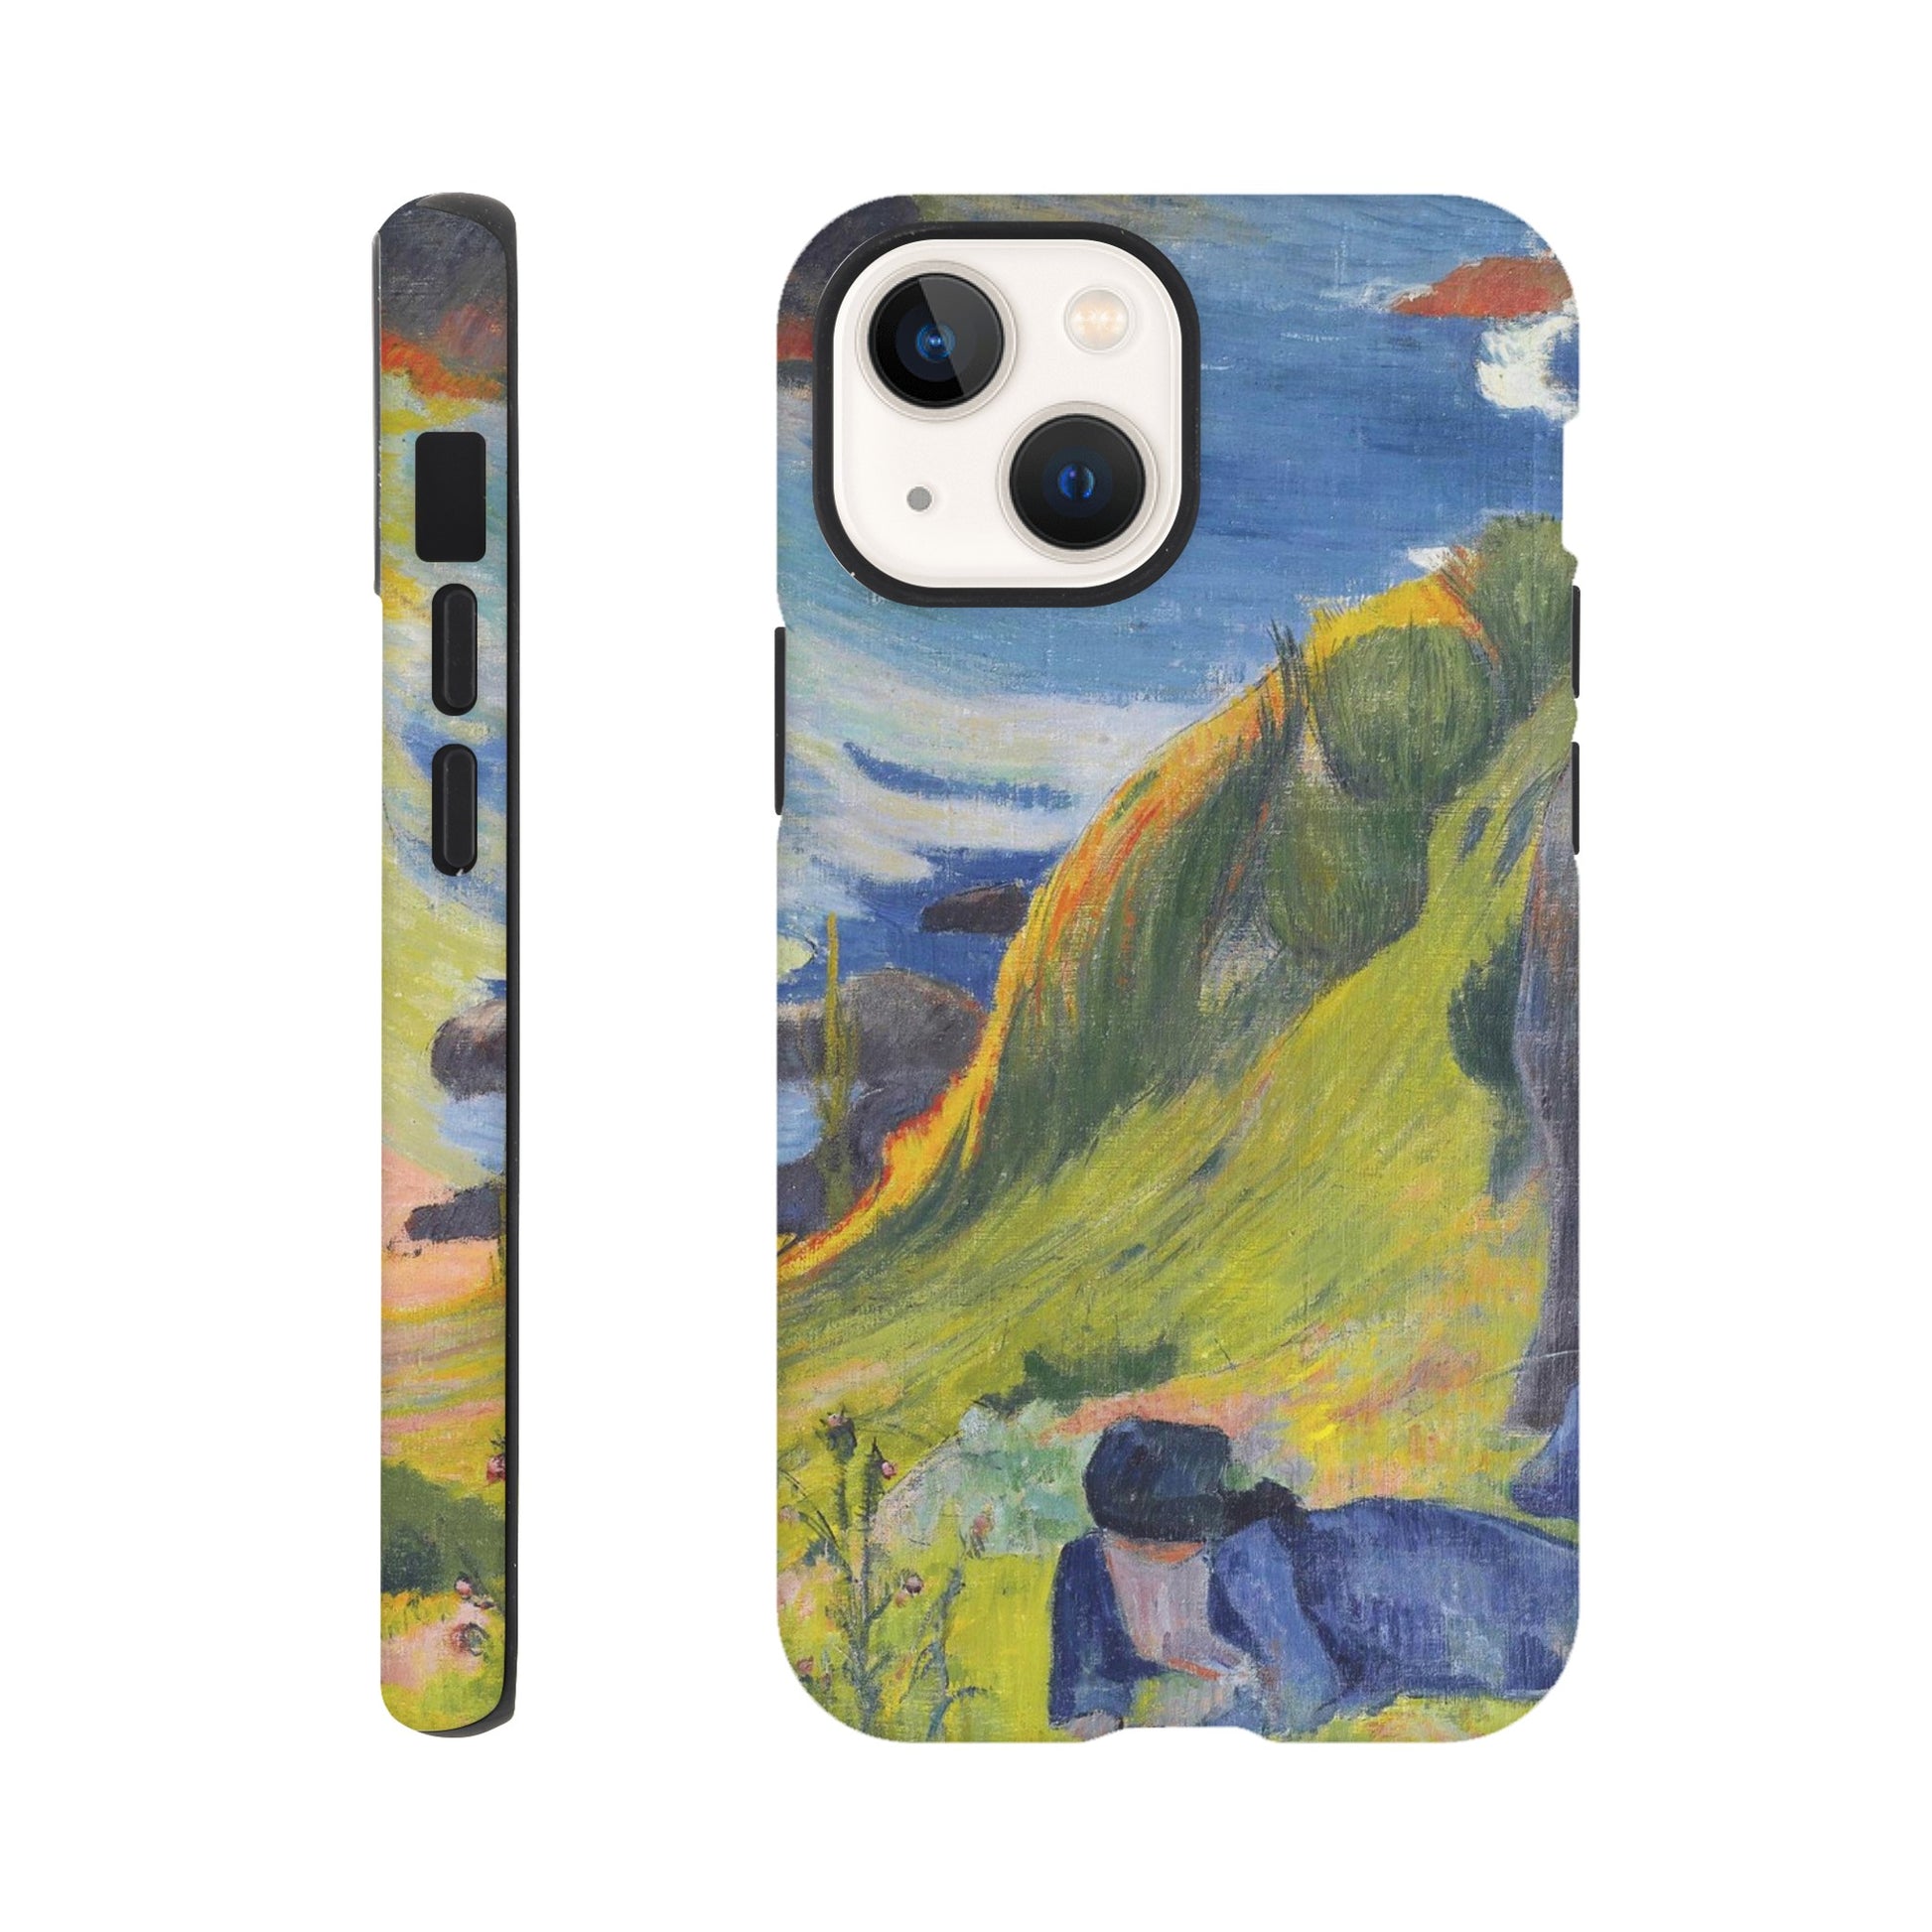 a phone case with a painting of a mountain scene